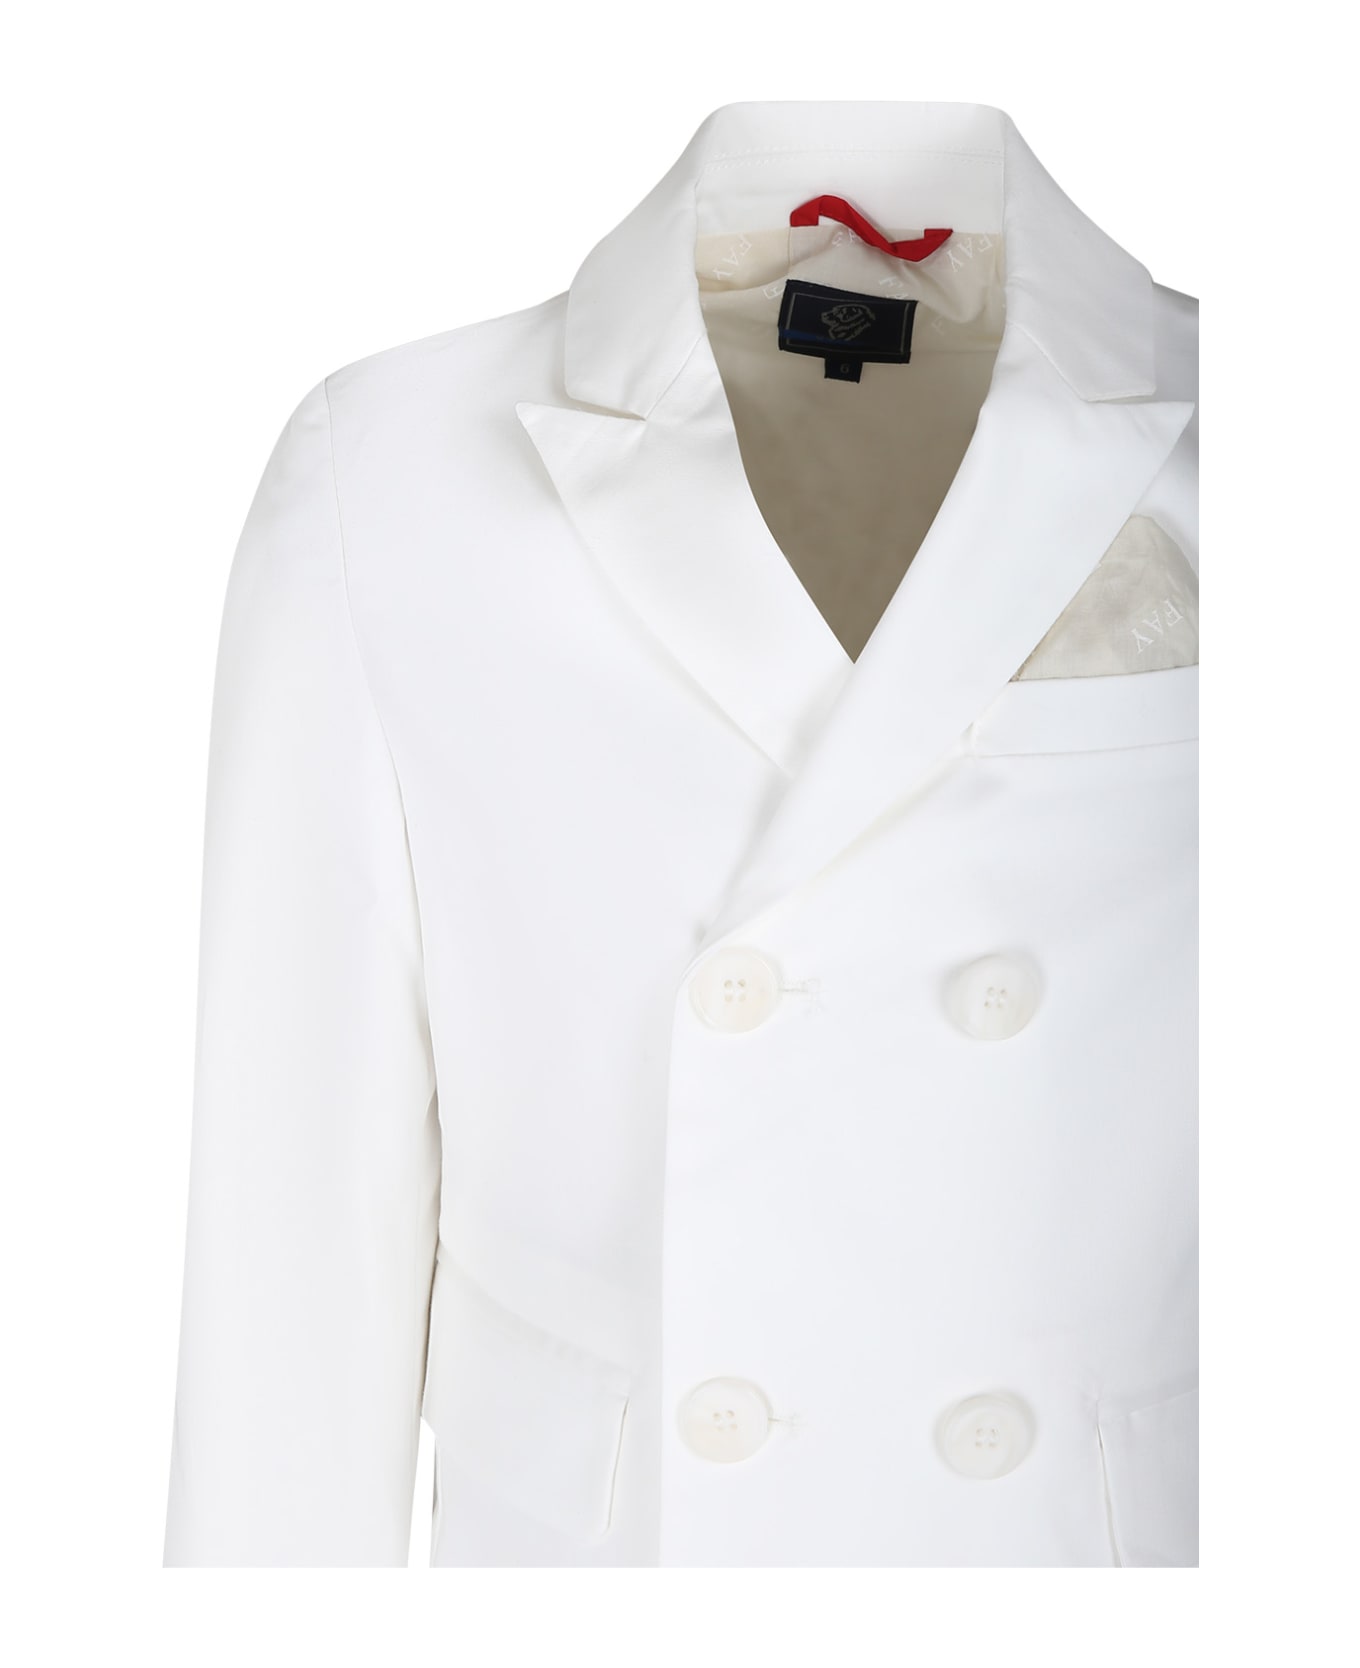 Fay White Suit For Boy - White